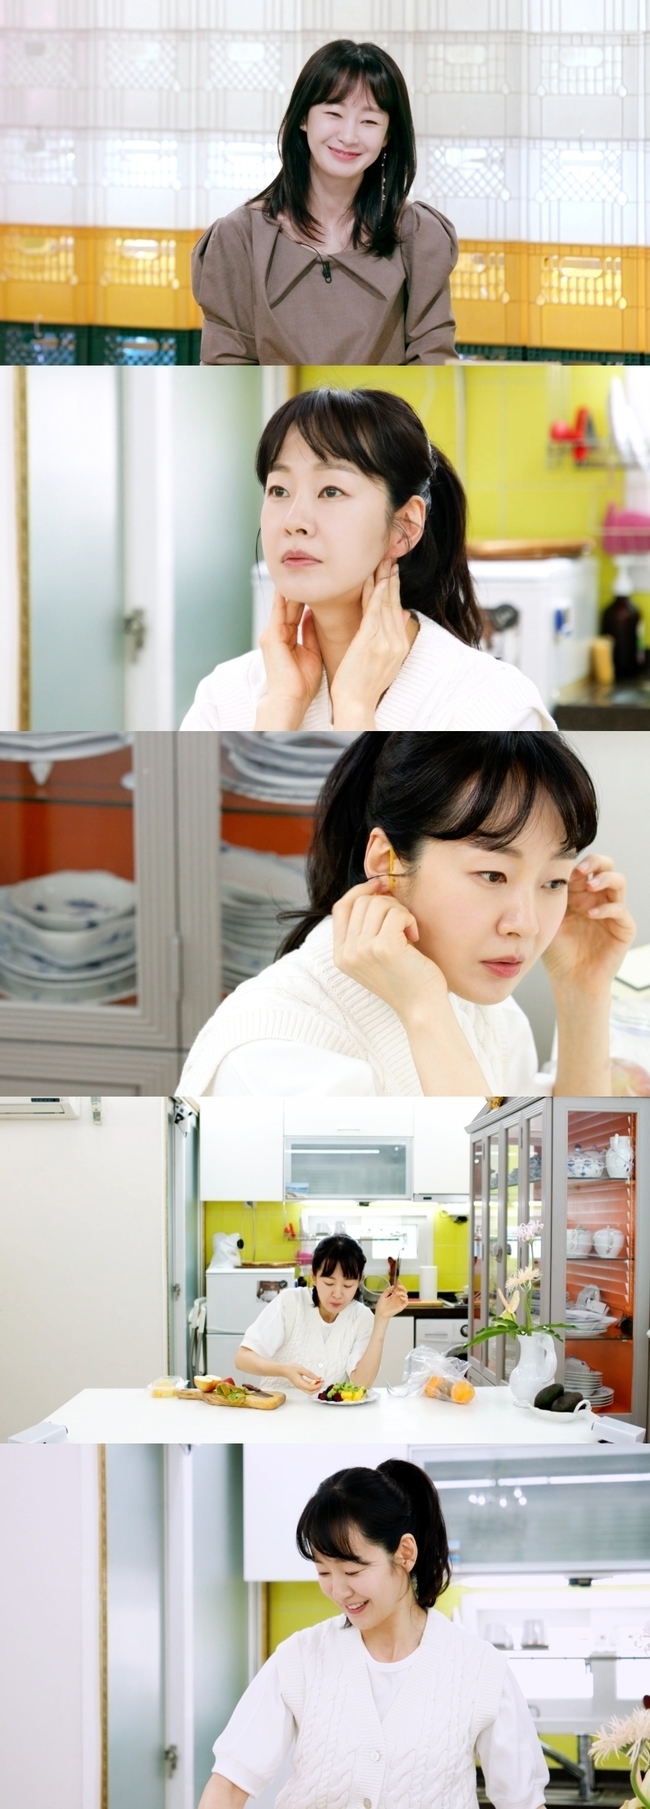 Actress Myung Se-bin reveals her secret to baby beautyKBS 2TV  ⁇ StarsStars Top Recipe at Fun-Staurant  ( ⁇ StarsStars Top Recipe at Fun-Staurant ), which will be broadcast on September 1, has a beautiful chef, Myung Se-bin, returning after a long time.Beauty Myung Se-bins lively and lovely single life, as well as personalized dishes and recipes for one person, are expected to be revealed during the entertainment industry.Myung Se-bin is enjoying a new heyday after JTBCs popular drama  ⁇  The Doctor Cha Jeong-suk  ⁇ , which has the highest audience rating of 18.5%.As soon as I met Myung Se-bin at the recent  ⁇  Stars Top Recipe at Fun-Staurant  ⁇  Studio recording,  ⁇  Stars Top Recipe at Fun-Staurant  ⁇  The family members did not really change  ⁇   ⁇   ⁇   ⁇ ,  ⁇   ⁇  The skin was so good.The special MC star looks directly at the frozen Beauty, and the MC boom manager laughed when he said that he wanted to say that he was the first Nitrogen Packaging Beauty in the entertainment industry after  ⁇   ⁇   ⁇  Beauty, Frozen Beauty.Myung Se-bin said, Thank you. I try to keep it. Myung Se-bin is 48 years old this year.In the VCR of Myung Se-bin, daily morning routines that protect the beauty of Myung Se-bin were revealed.Myung Se-bin cut small fruit of various colors such as blueberry, raspberry, pineapple, kiwi from the morning and put all kinds of fruit in one hand as if eating nutrients.In the first Fruit Eating Show, Myung Se-bin said, I think it is synergistic in flavor, texture and taste to eat at once. I heard that it is good to eat various fruit with color.Myung Se-bins second morning routine, which was released after a handful of Fruit eating shows, was the management of a rubber band. Myung Se-bin walked the yellow rubber band tight enough to fold his ears.When everyone was curious, Myung Se-bin focused his attention on explaining the reason for managing the rubber band, and he did not forget to massage the lymph around his face with his hands.The morning routine of Myung Se-bin, famous for her brilliant beauty, exploded the attention of the Stars Top Recipe at Fun-Staurant family, and everyone wondered about her diet.Myung Se-bin has recently released Fugu, which is missing, and other recipes that he enjoys these days.Stars Top Recipe at Fun-Staurant will be broadcasted at 8:30 pm on September 1st.